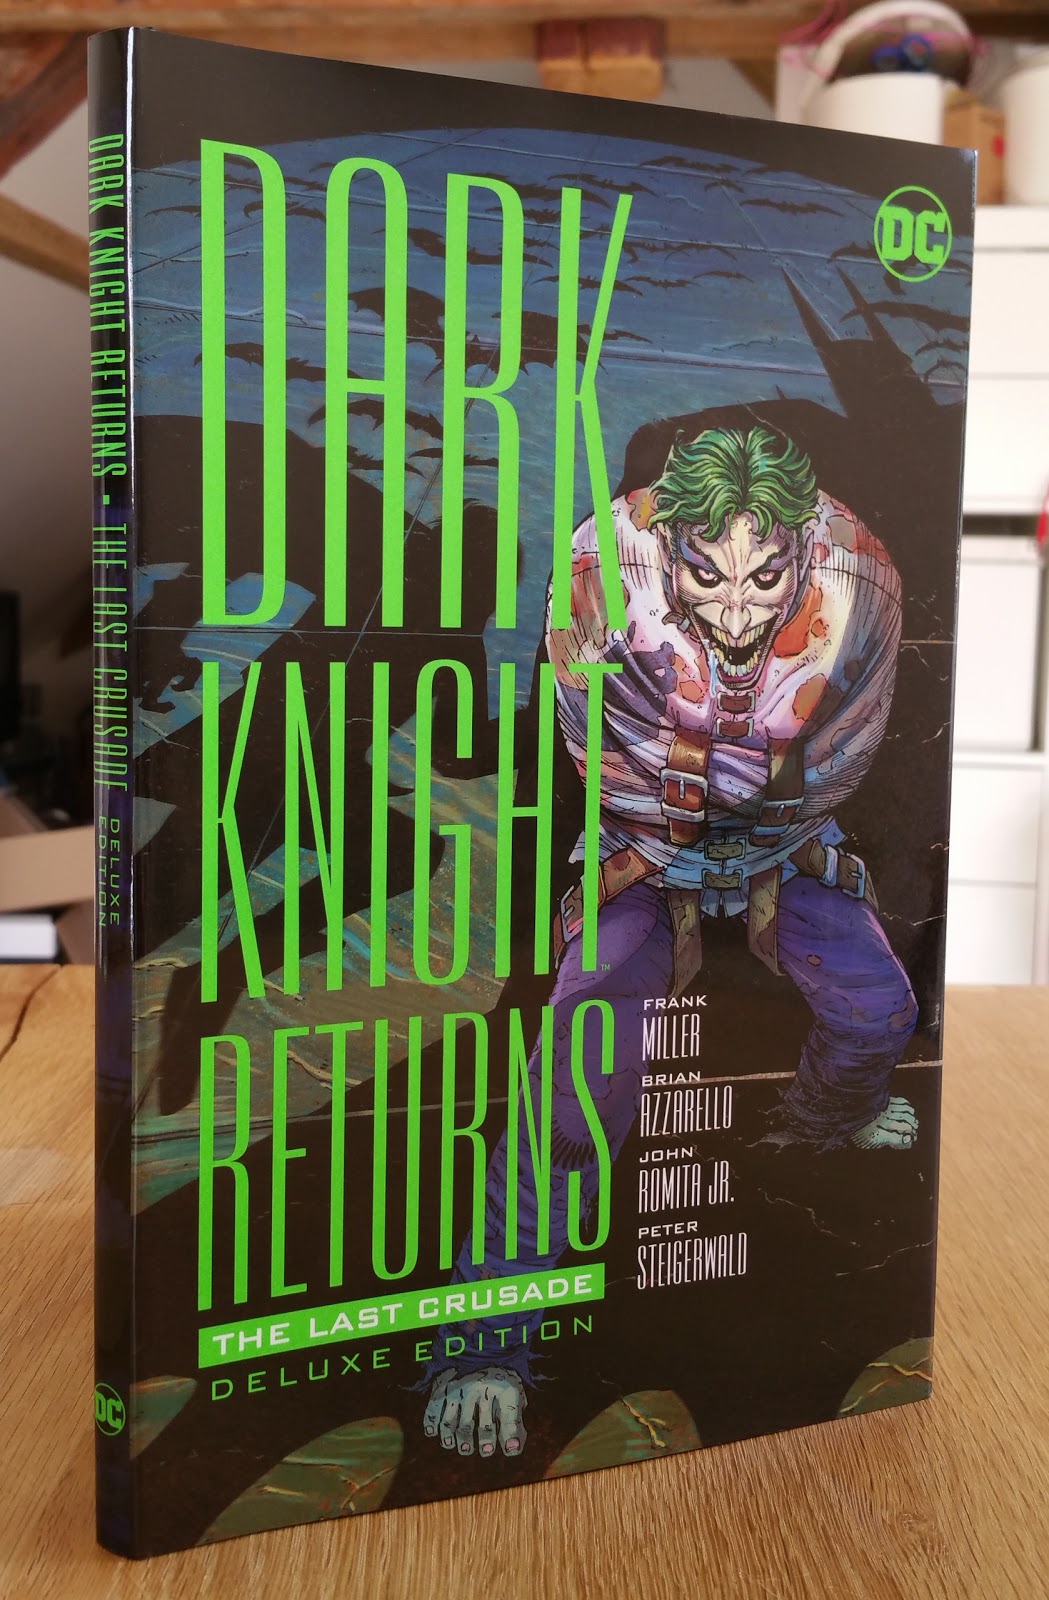 my absolute collection: Dark Knight Returns The Last Crusade Deluxe Edition